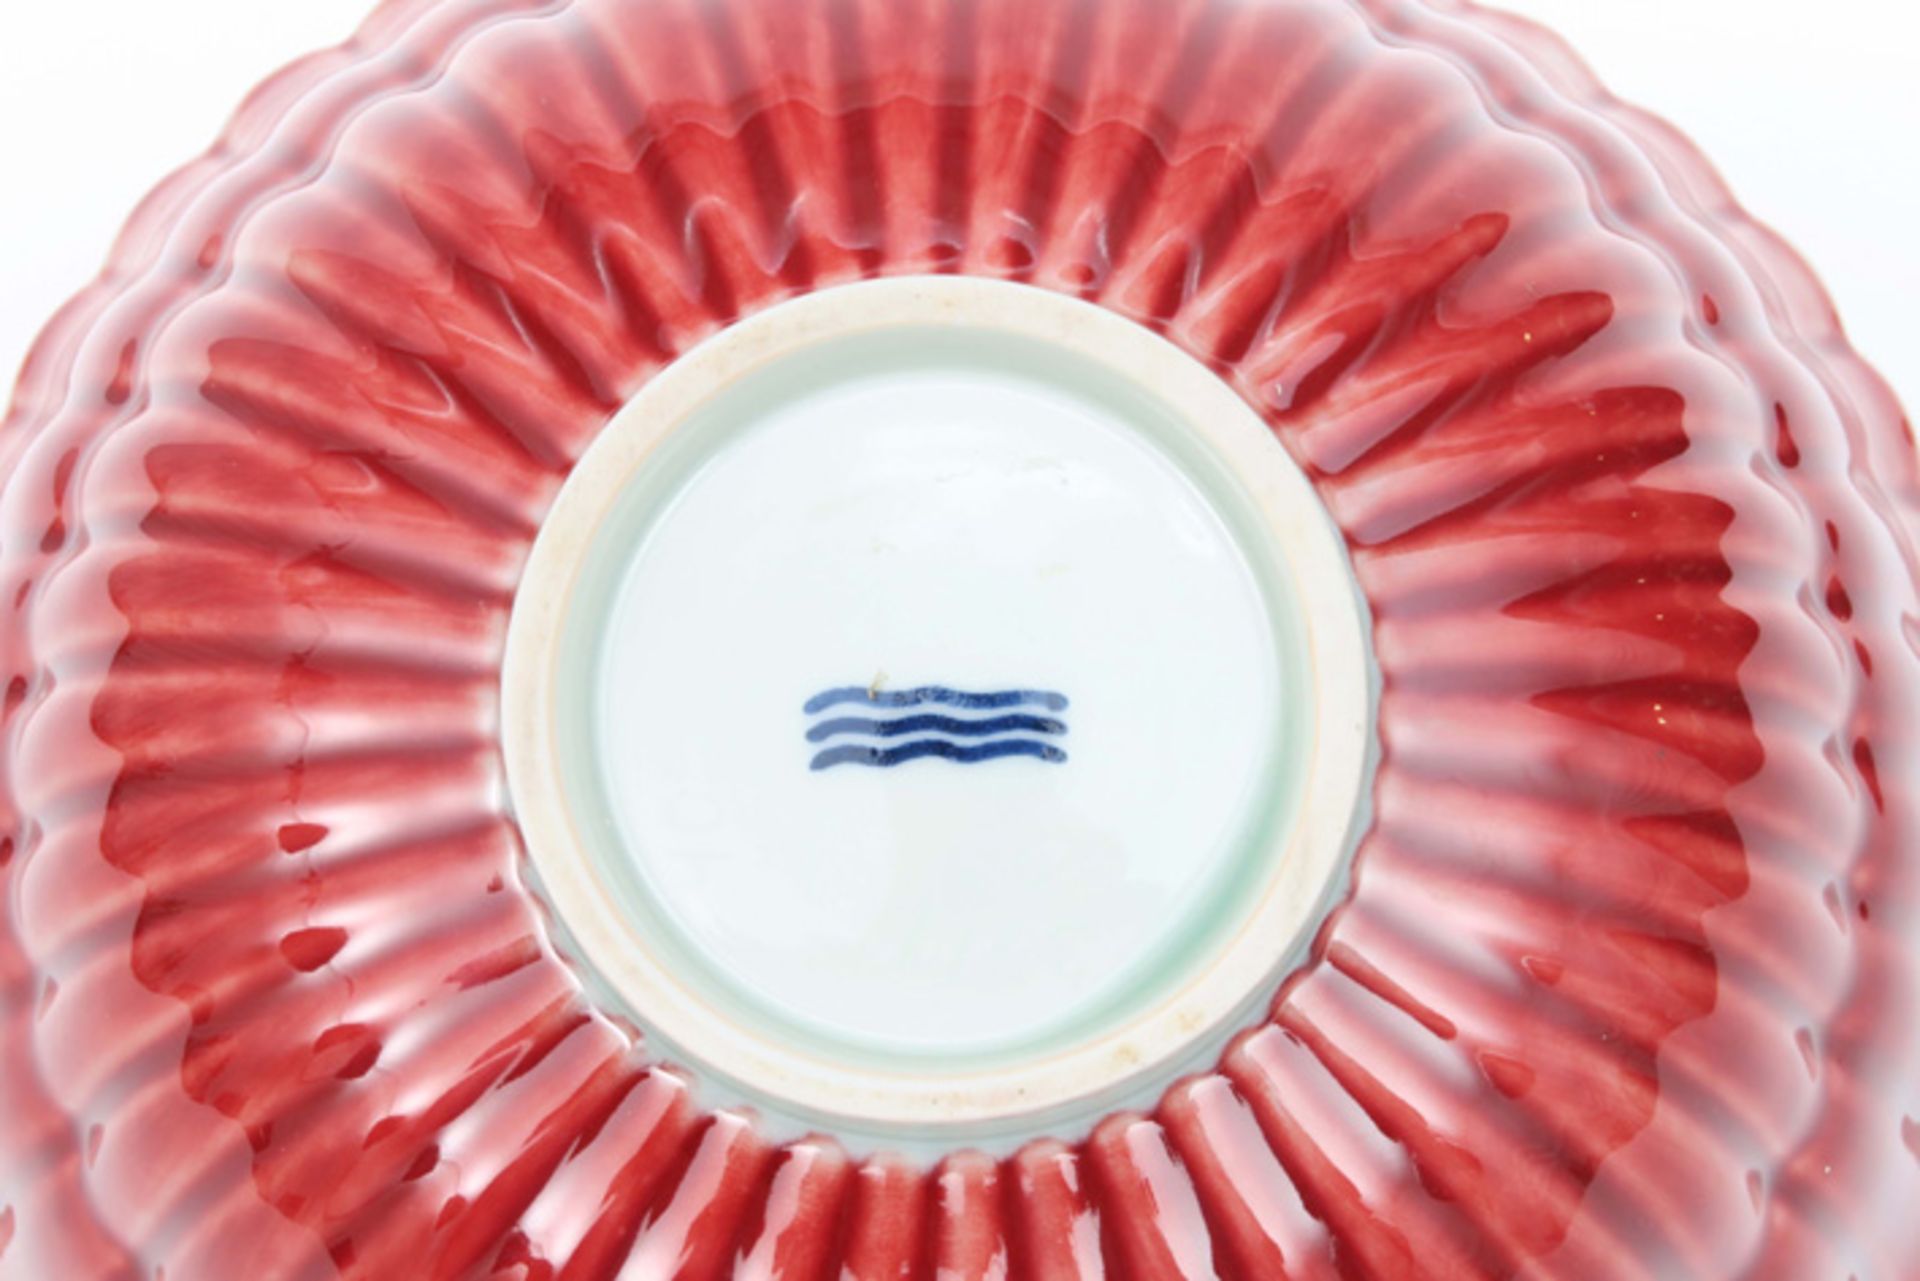 scalloped lotusflower shaped bowl in marked Royal Kopenhagen porcelain with embossed ribs||Bowl in - Image 5 of 5